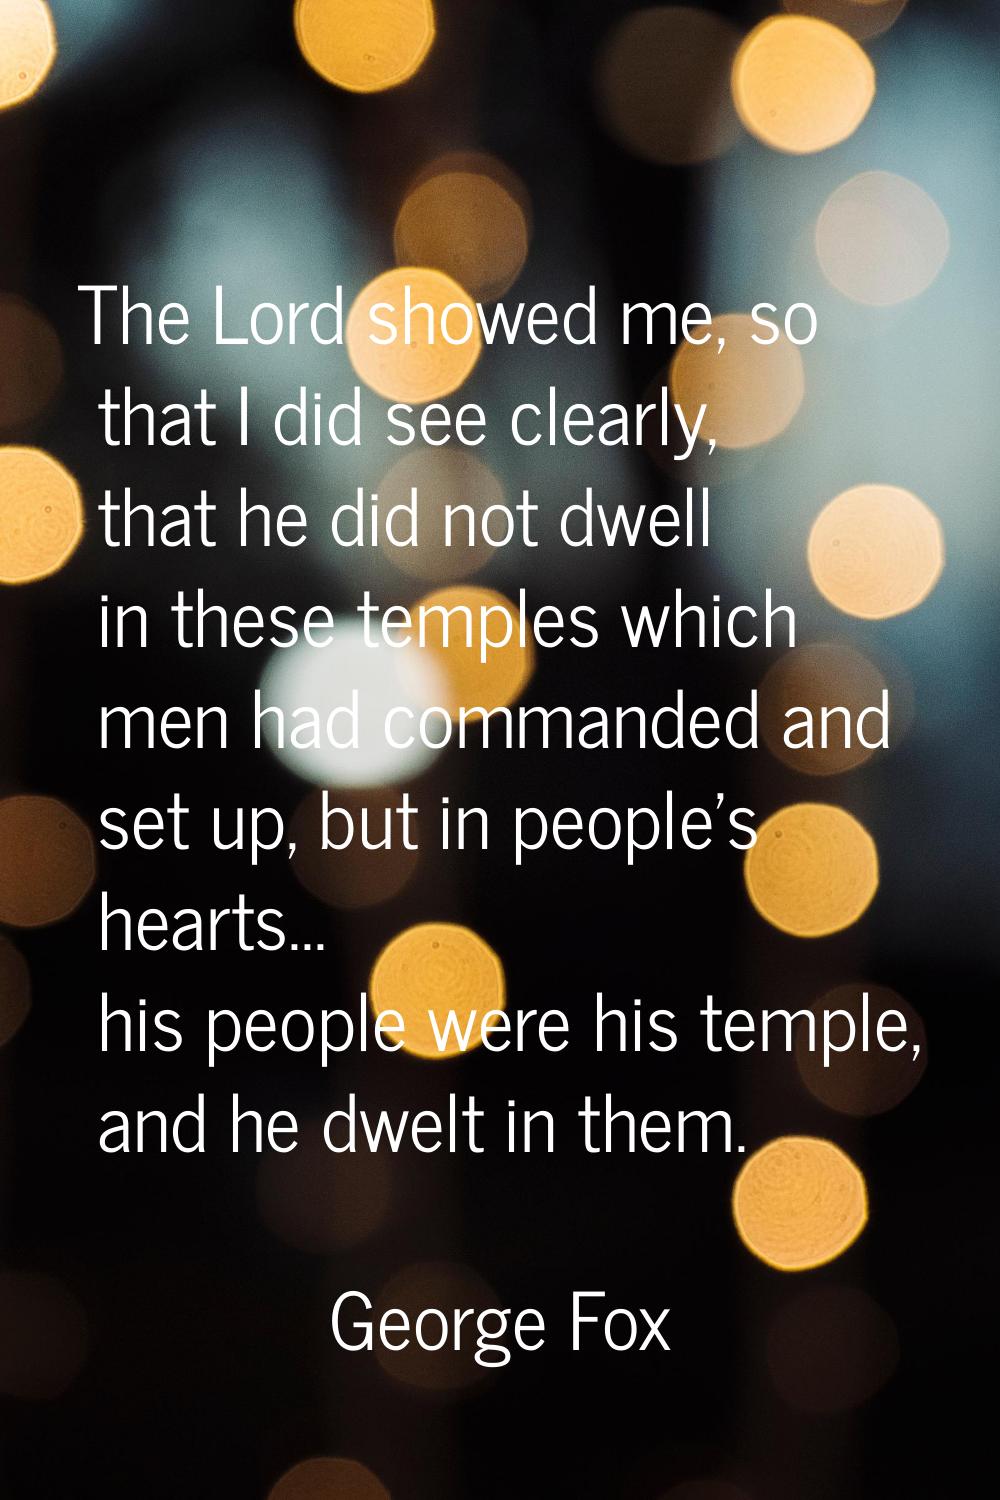 The Lord showed me, so that I did see clearly, that he did not dwell in these temples which men had